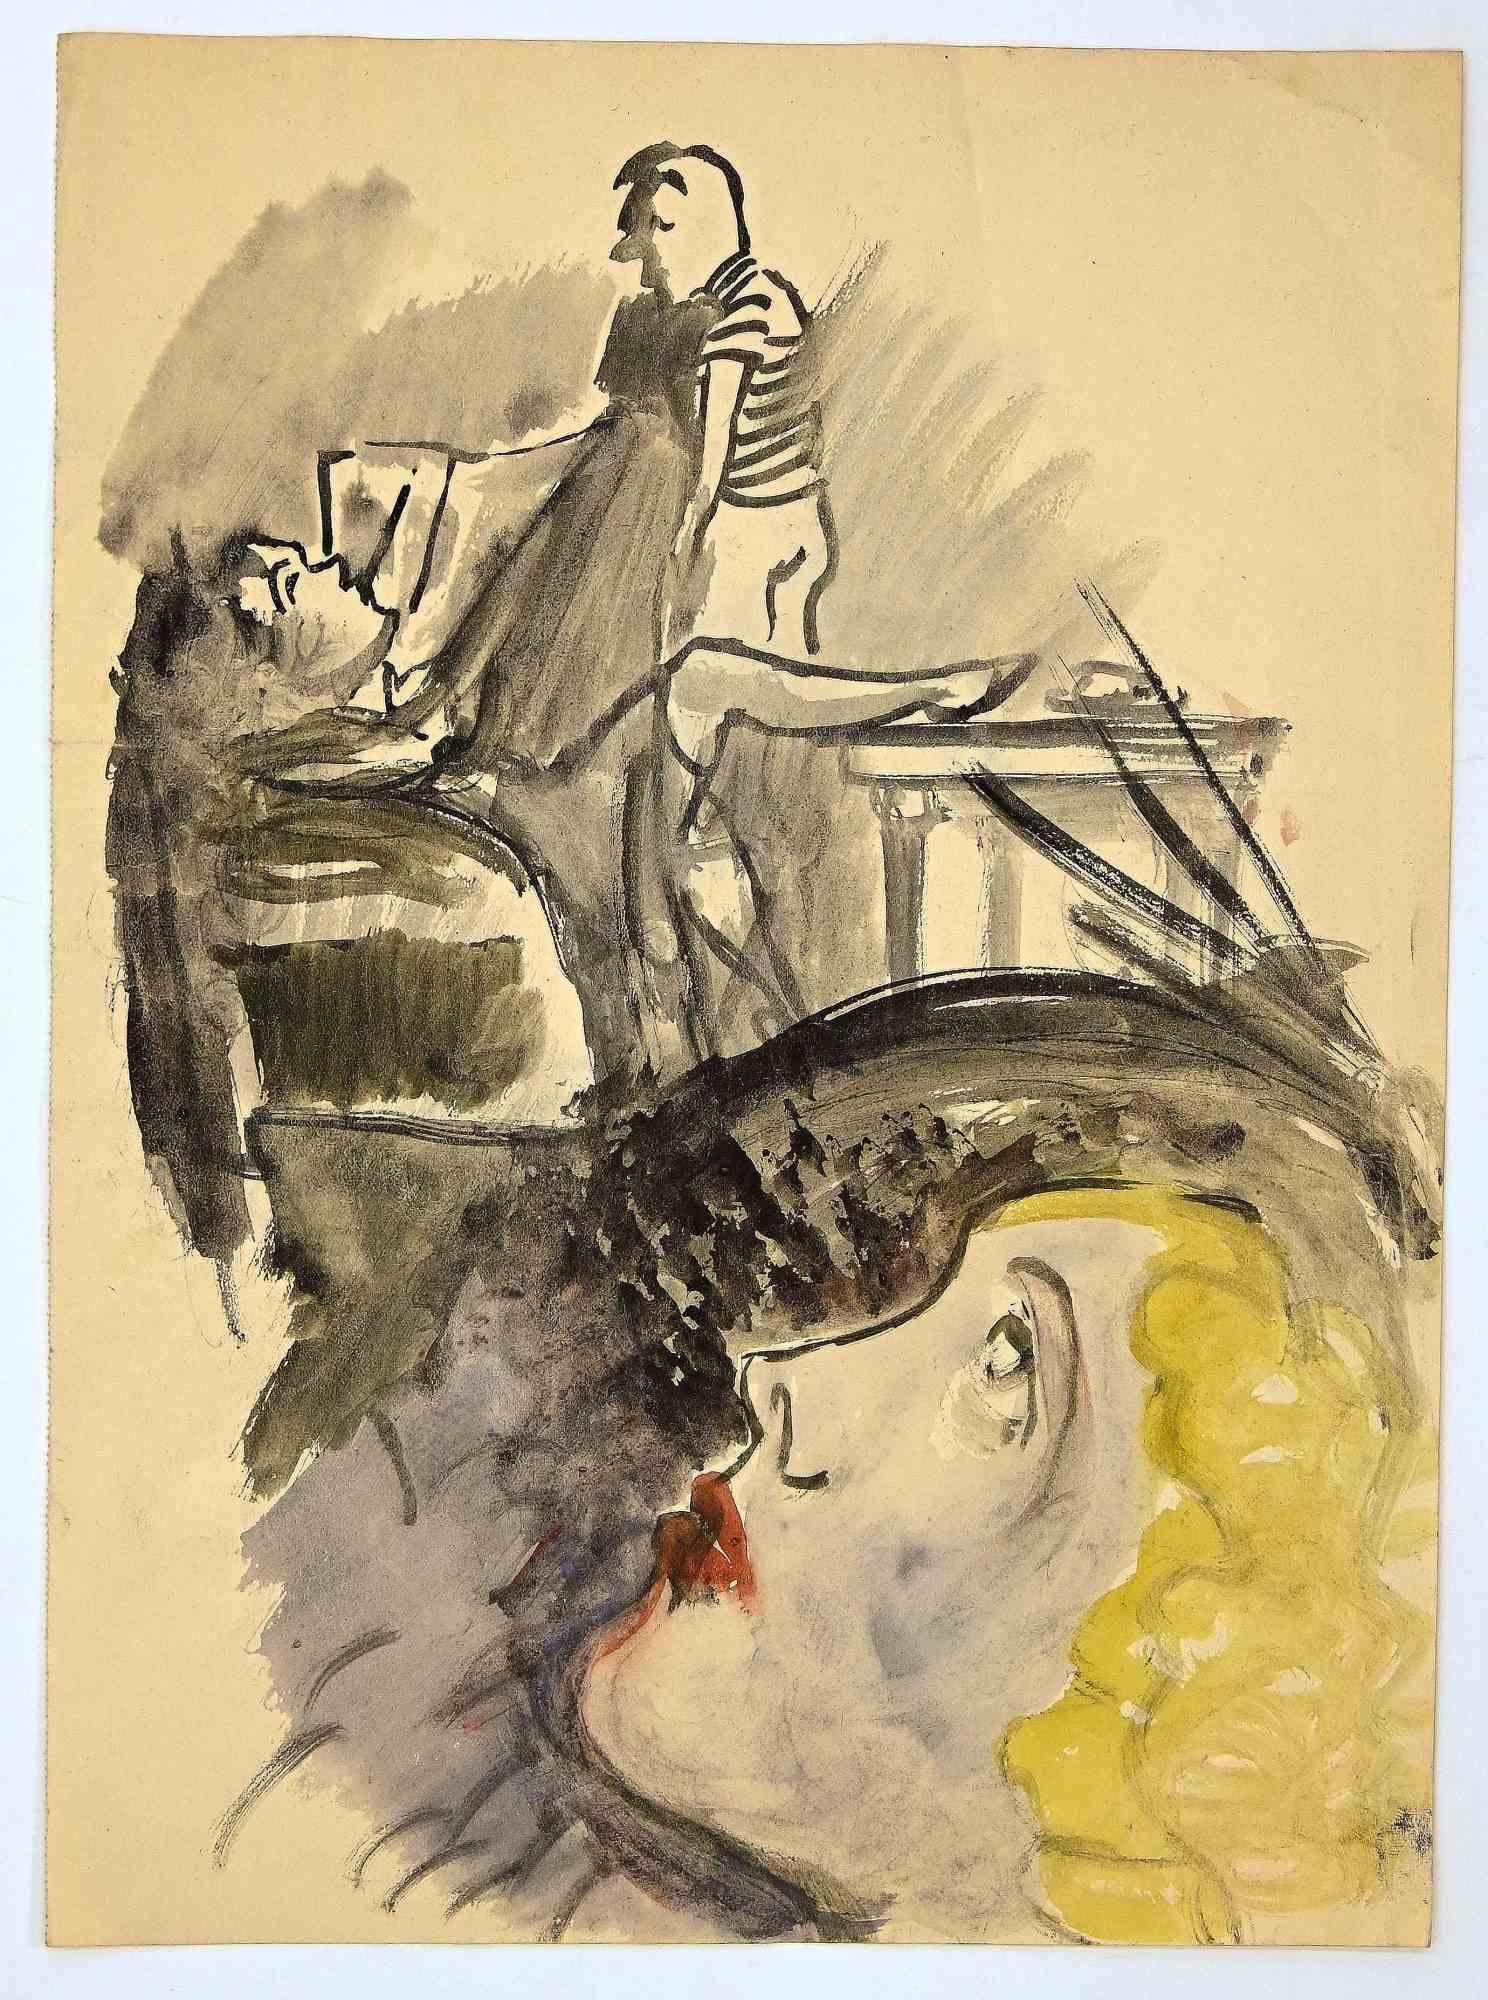 The Dream is an original Watercolour realized by Mino Maccari in mid-20th century.

Good condition on a colored cream paper, with other sketch on rear.

No signature.

Mino Maccari (1898-1989) was an Italian writer, painter, engraver and journalist,